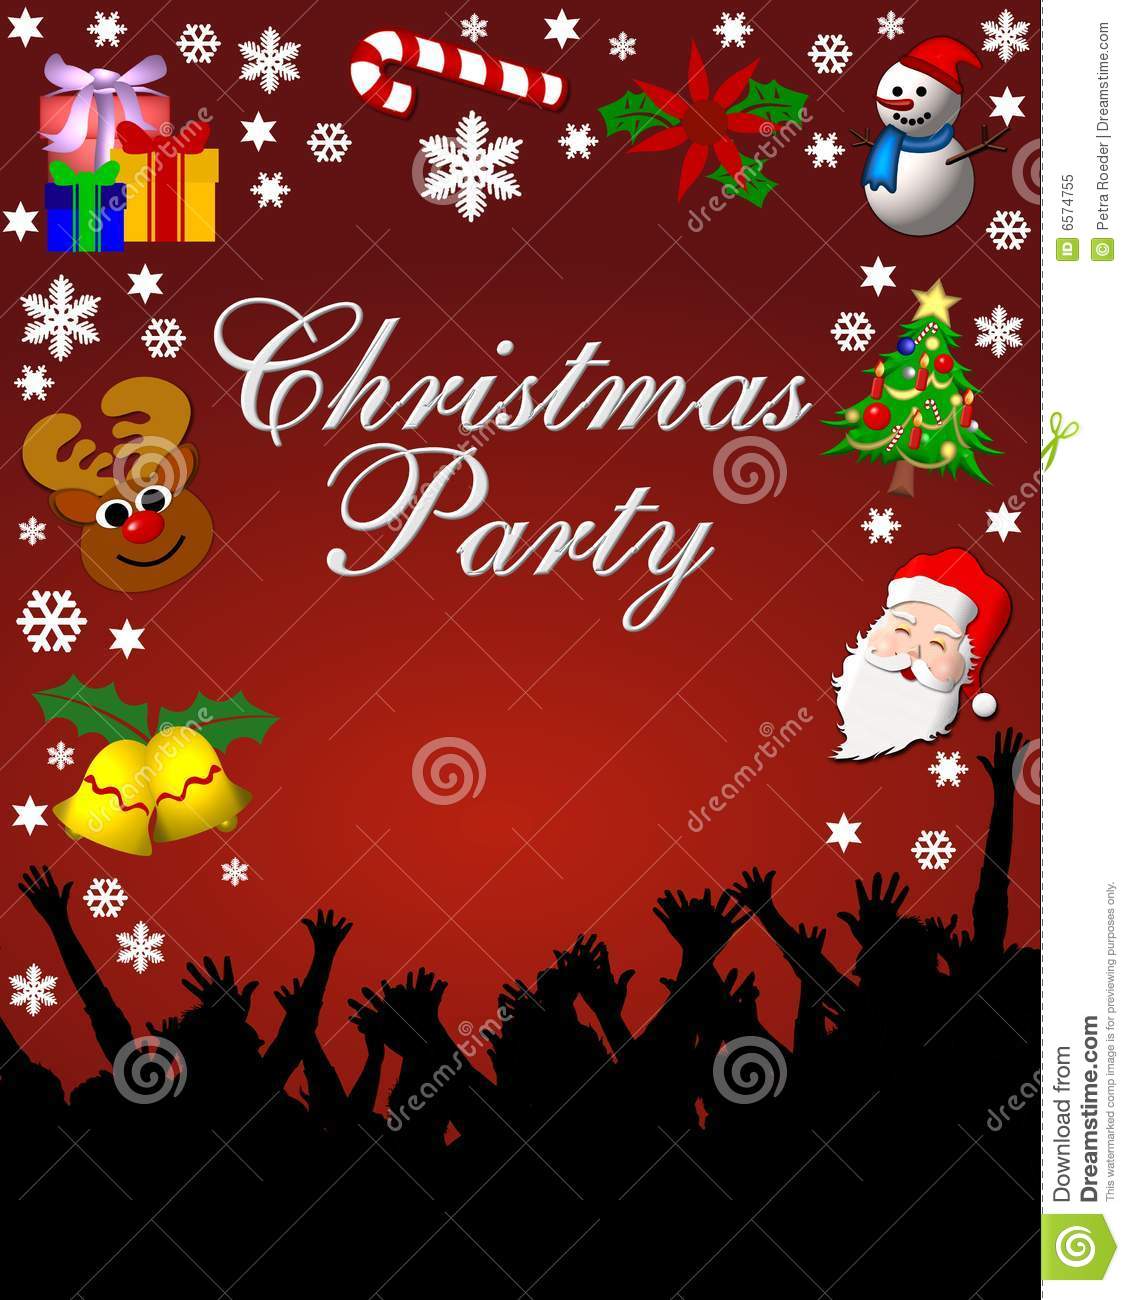 Christmas Party Stationary With Holiday Graphics